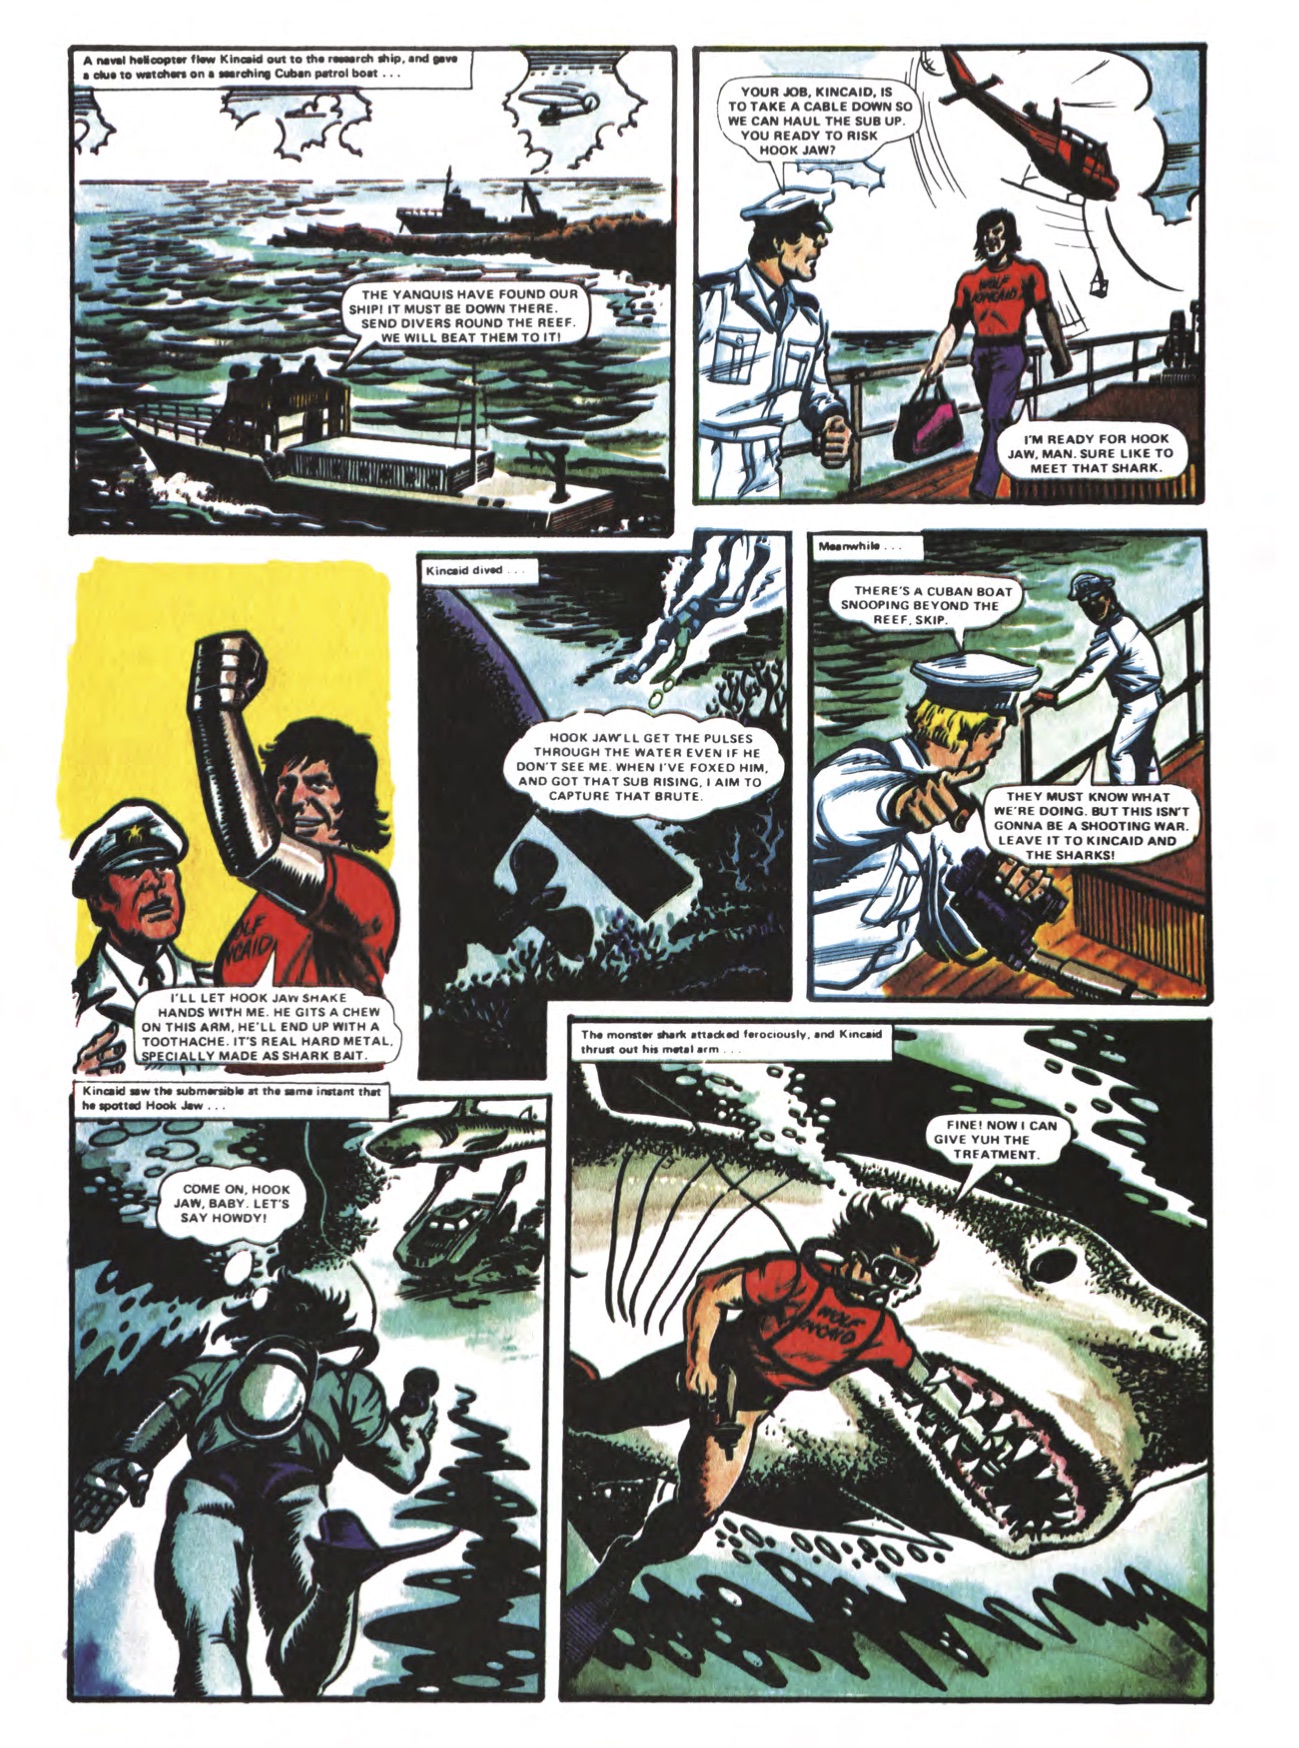 Hook_Jaw_Archive_Page 4